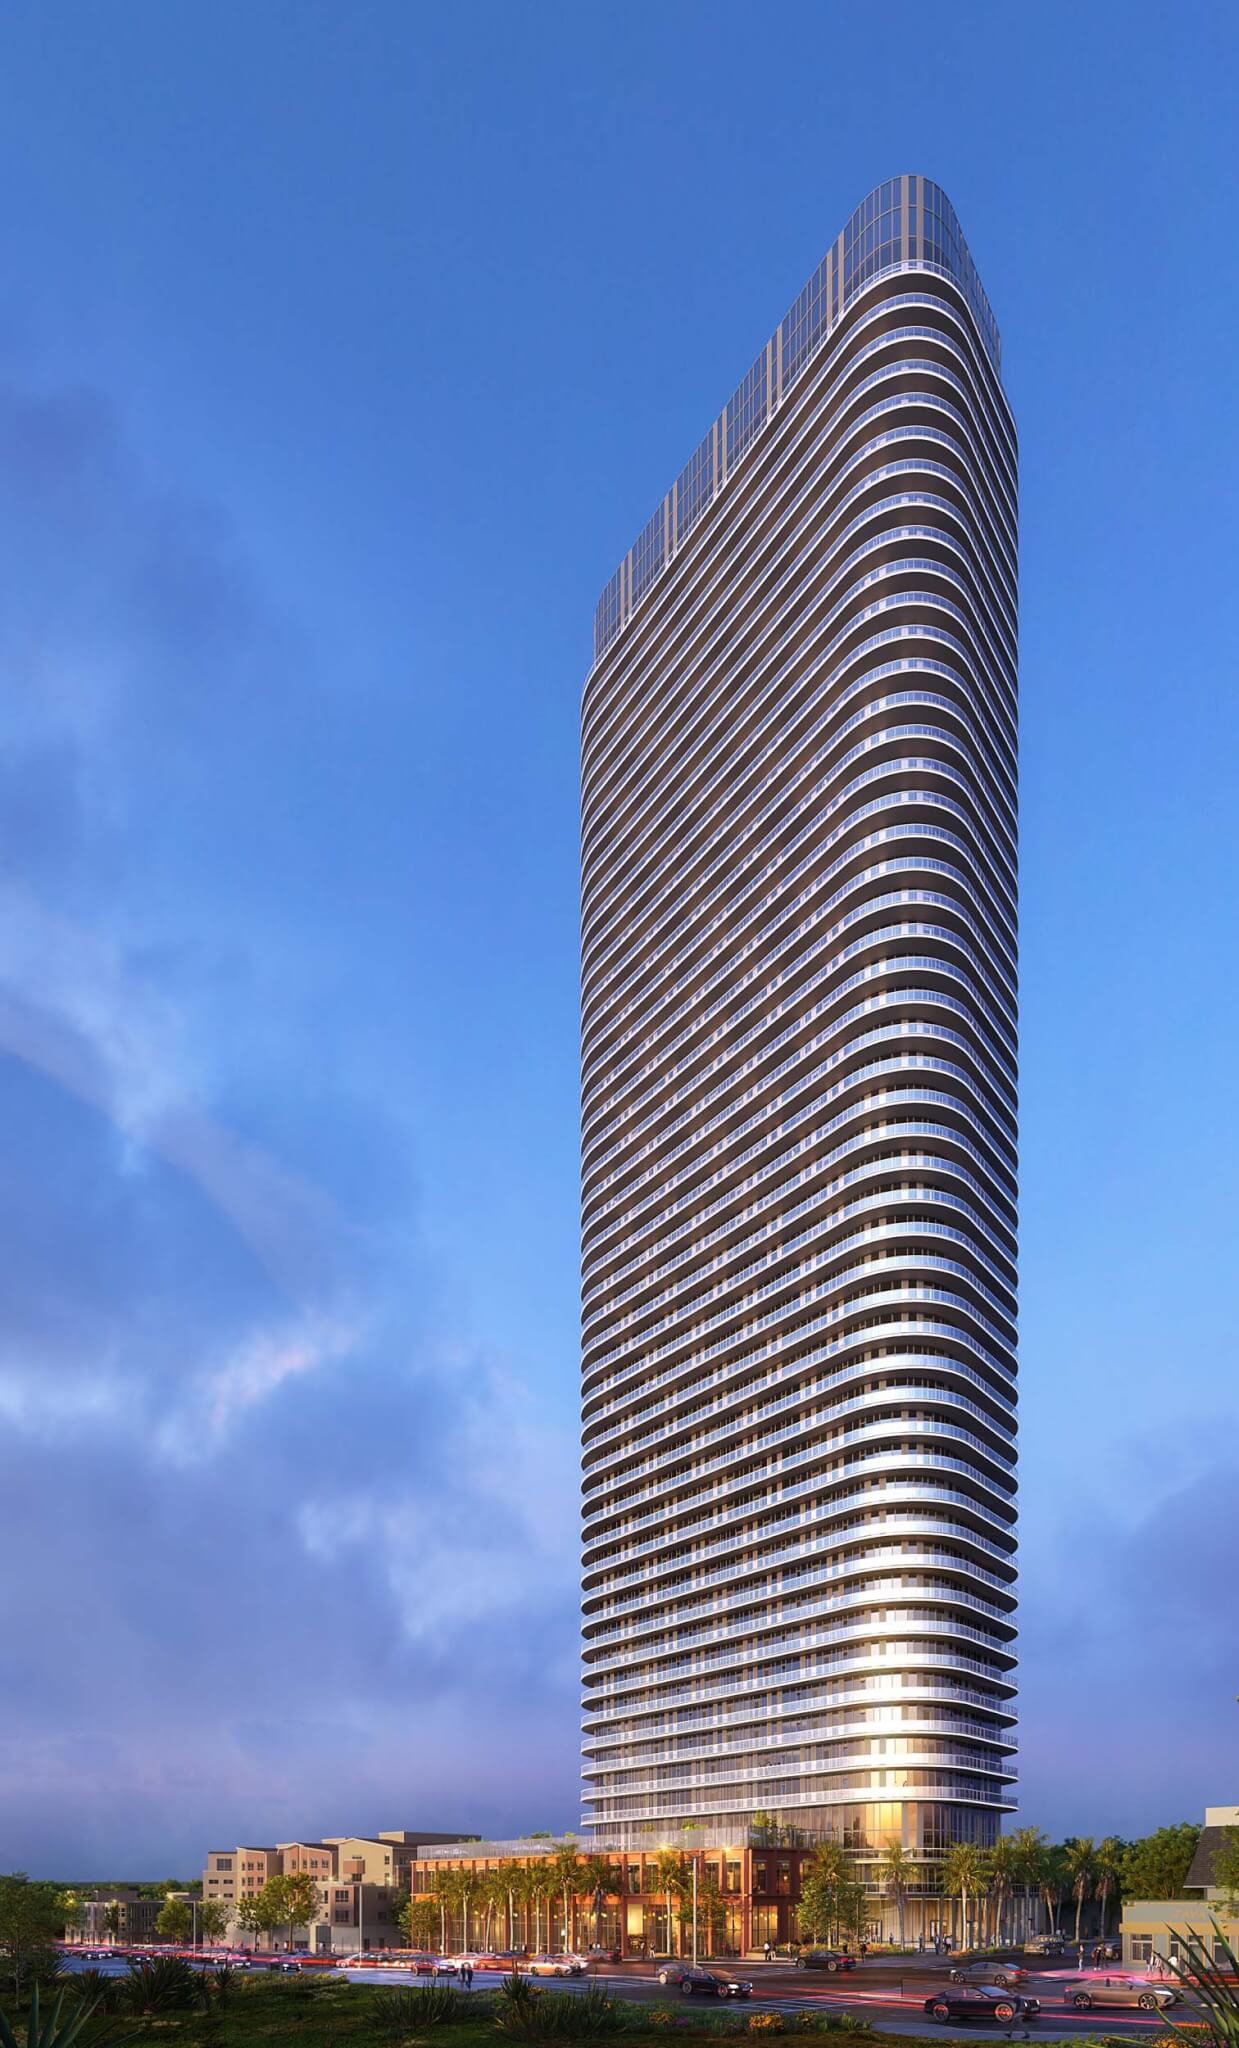 rendering of a residential tower